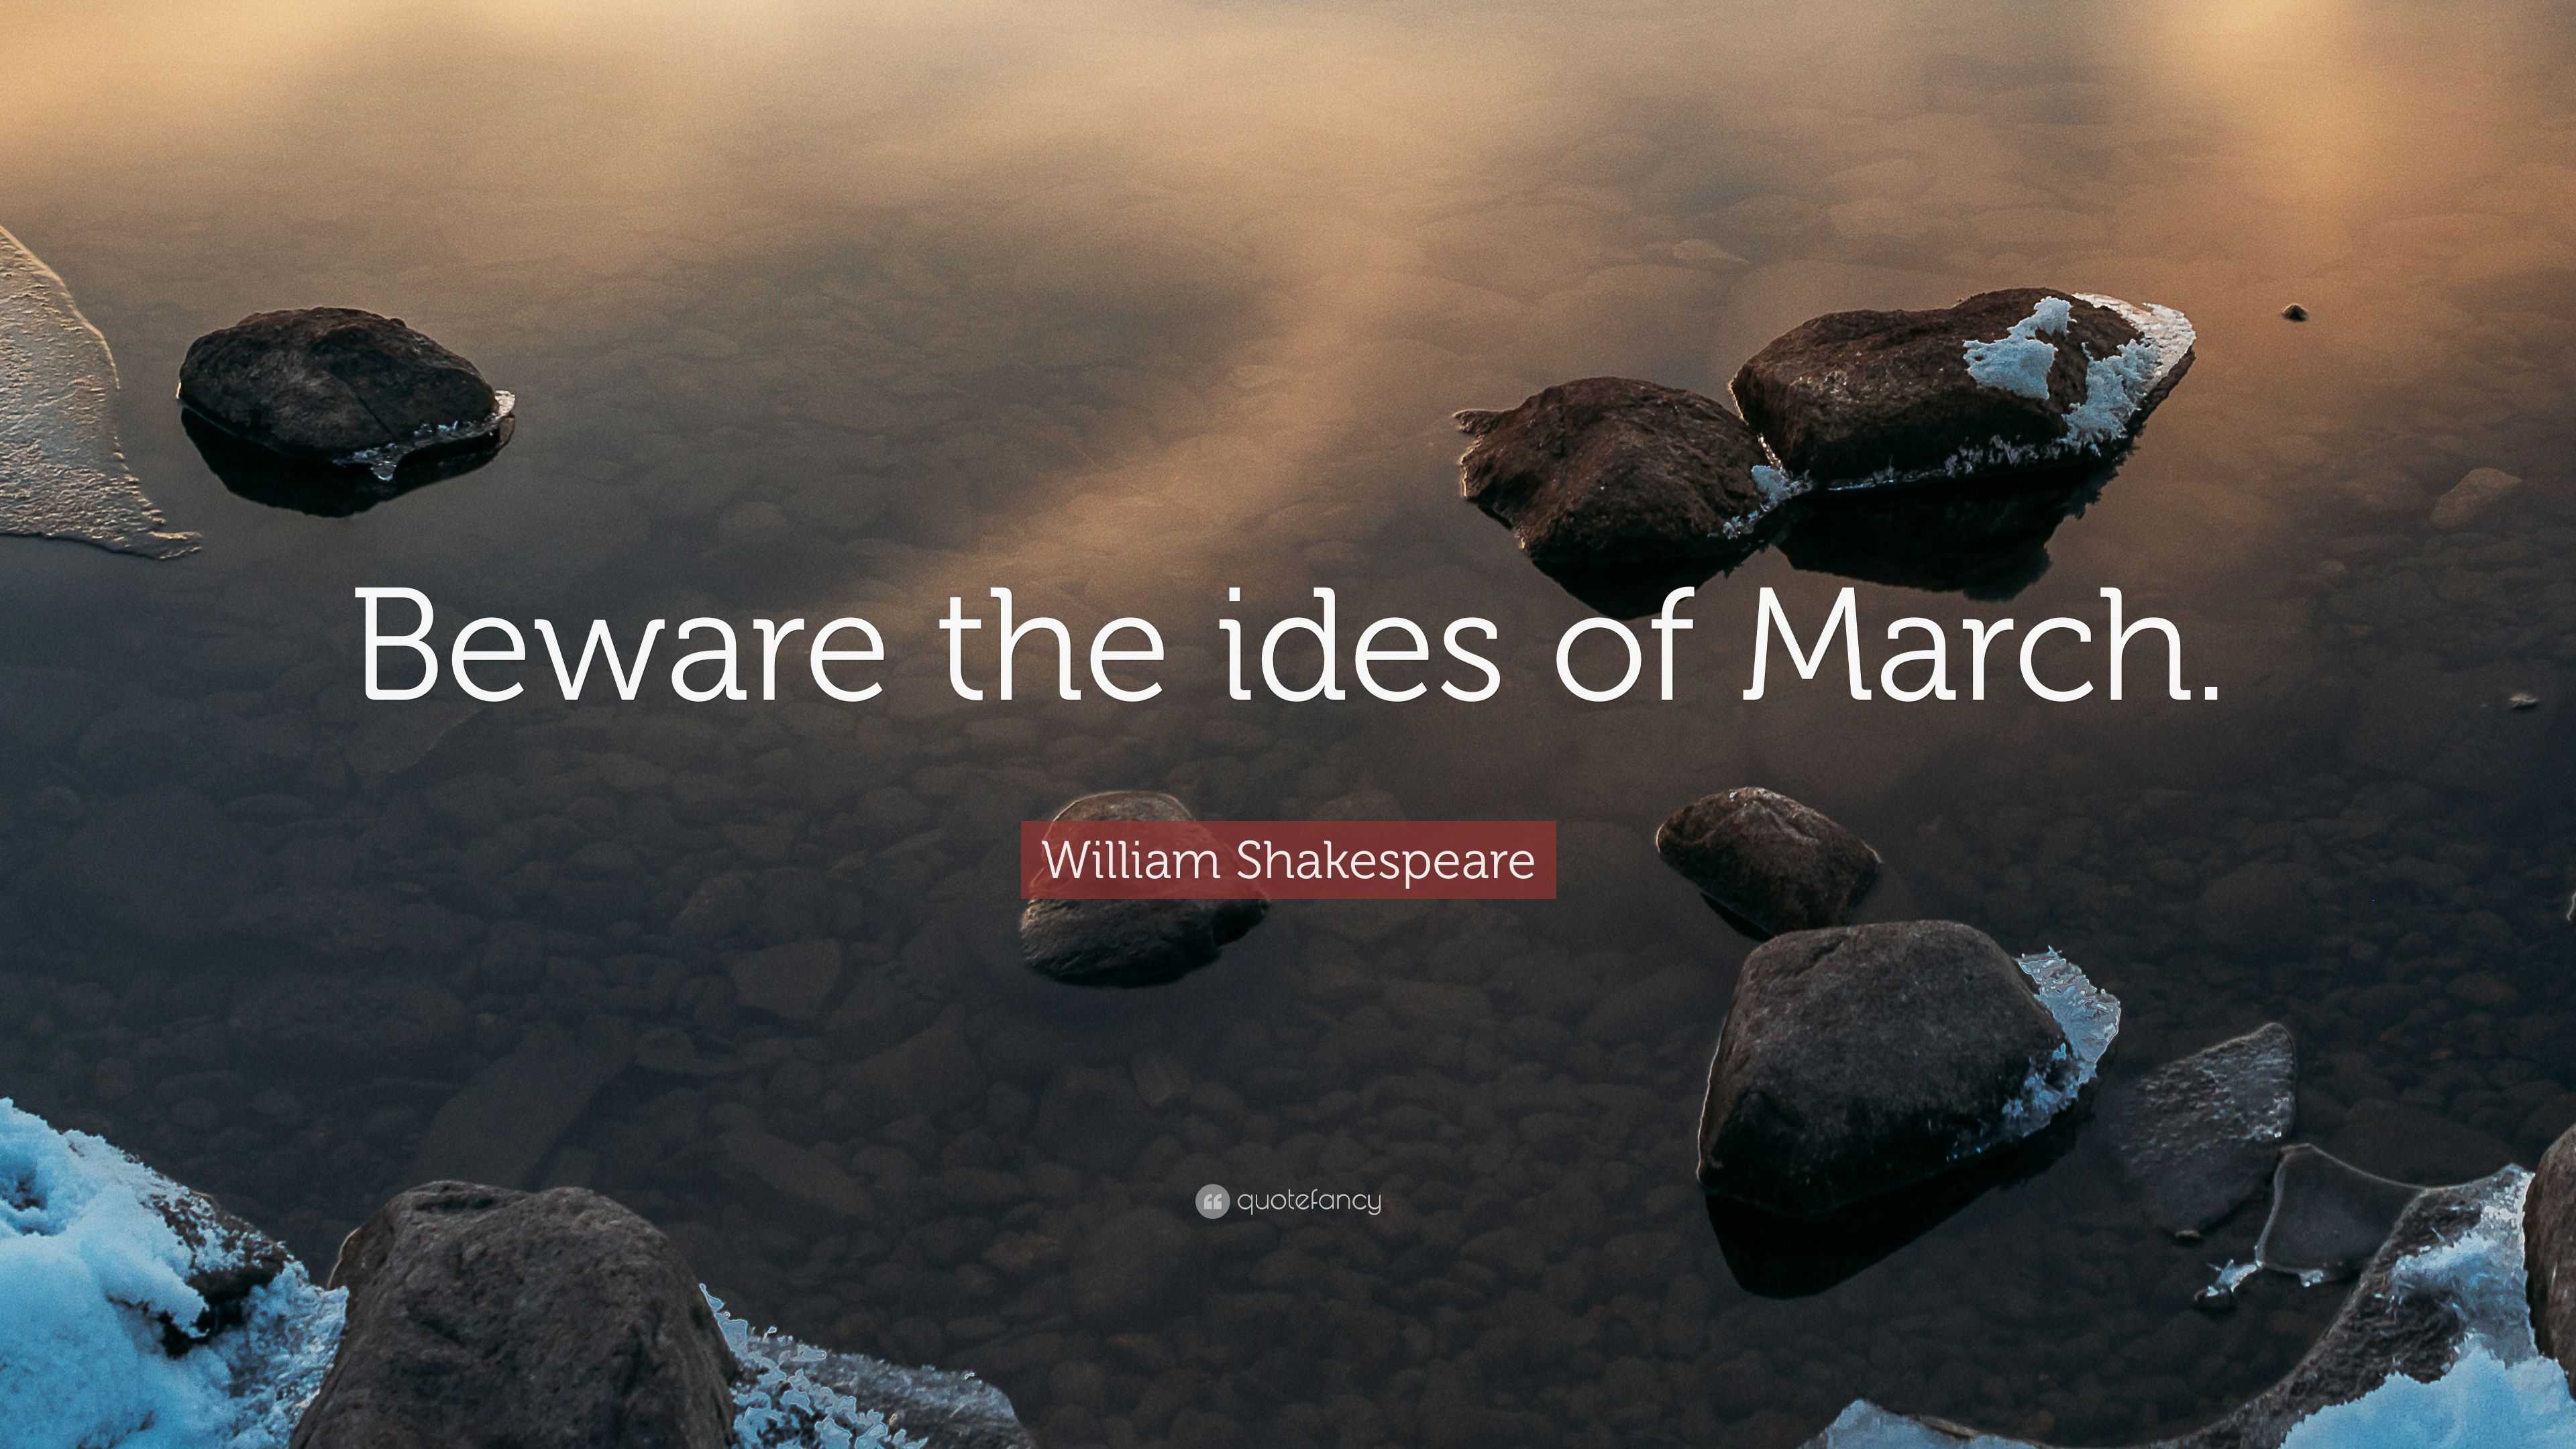 William Shakespeare Quote “Beware the ides of March.”